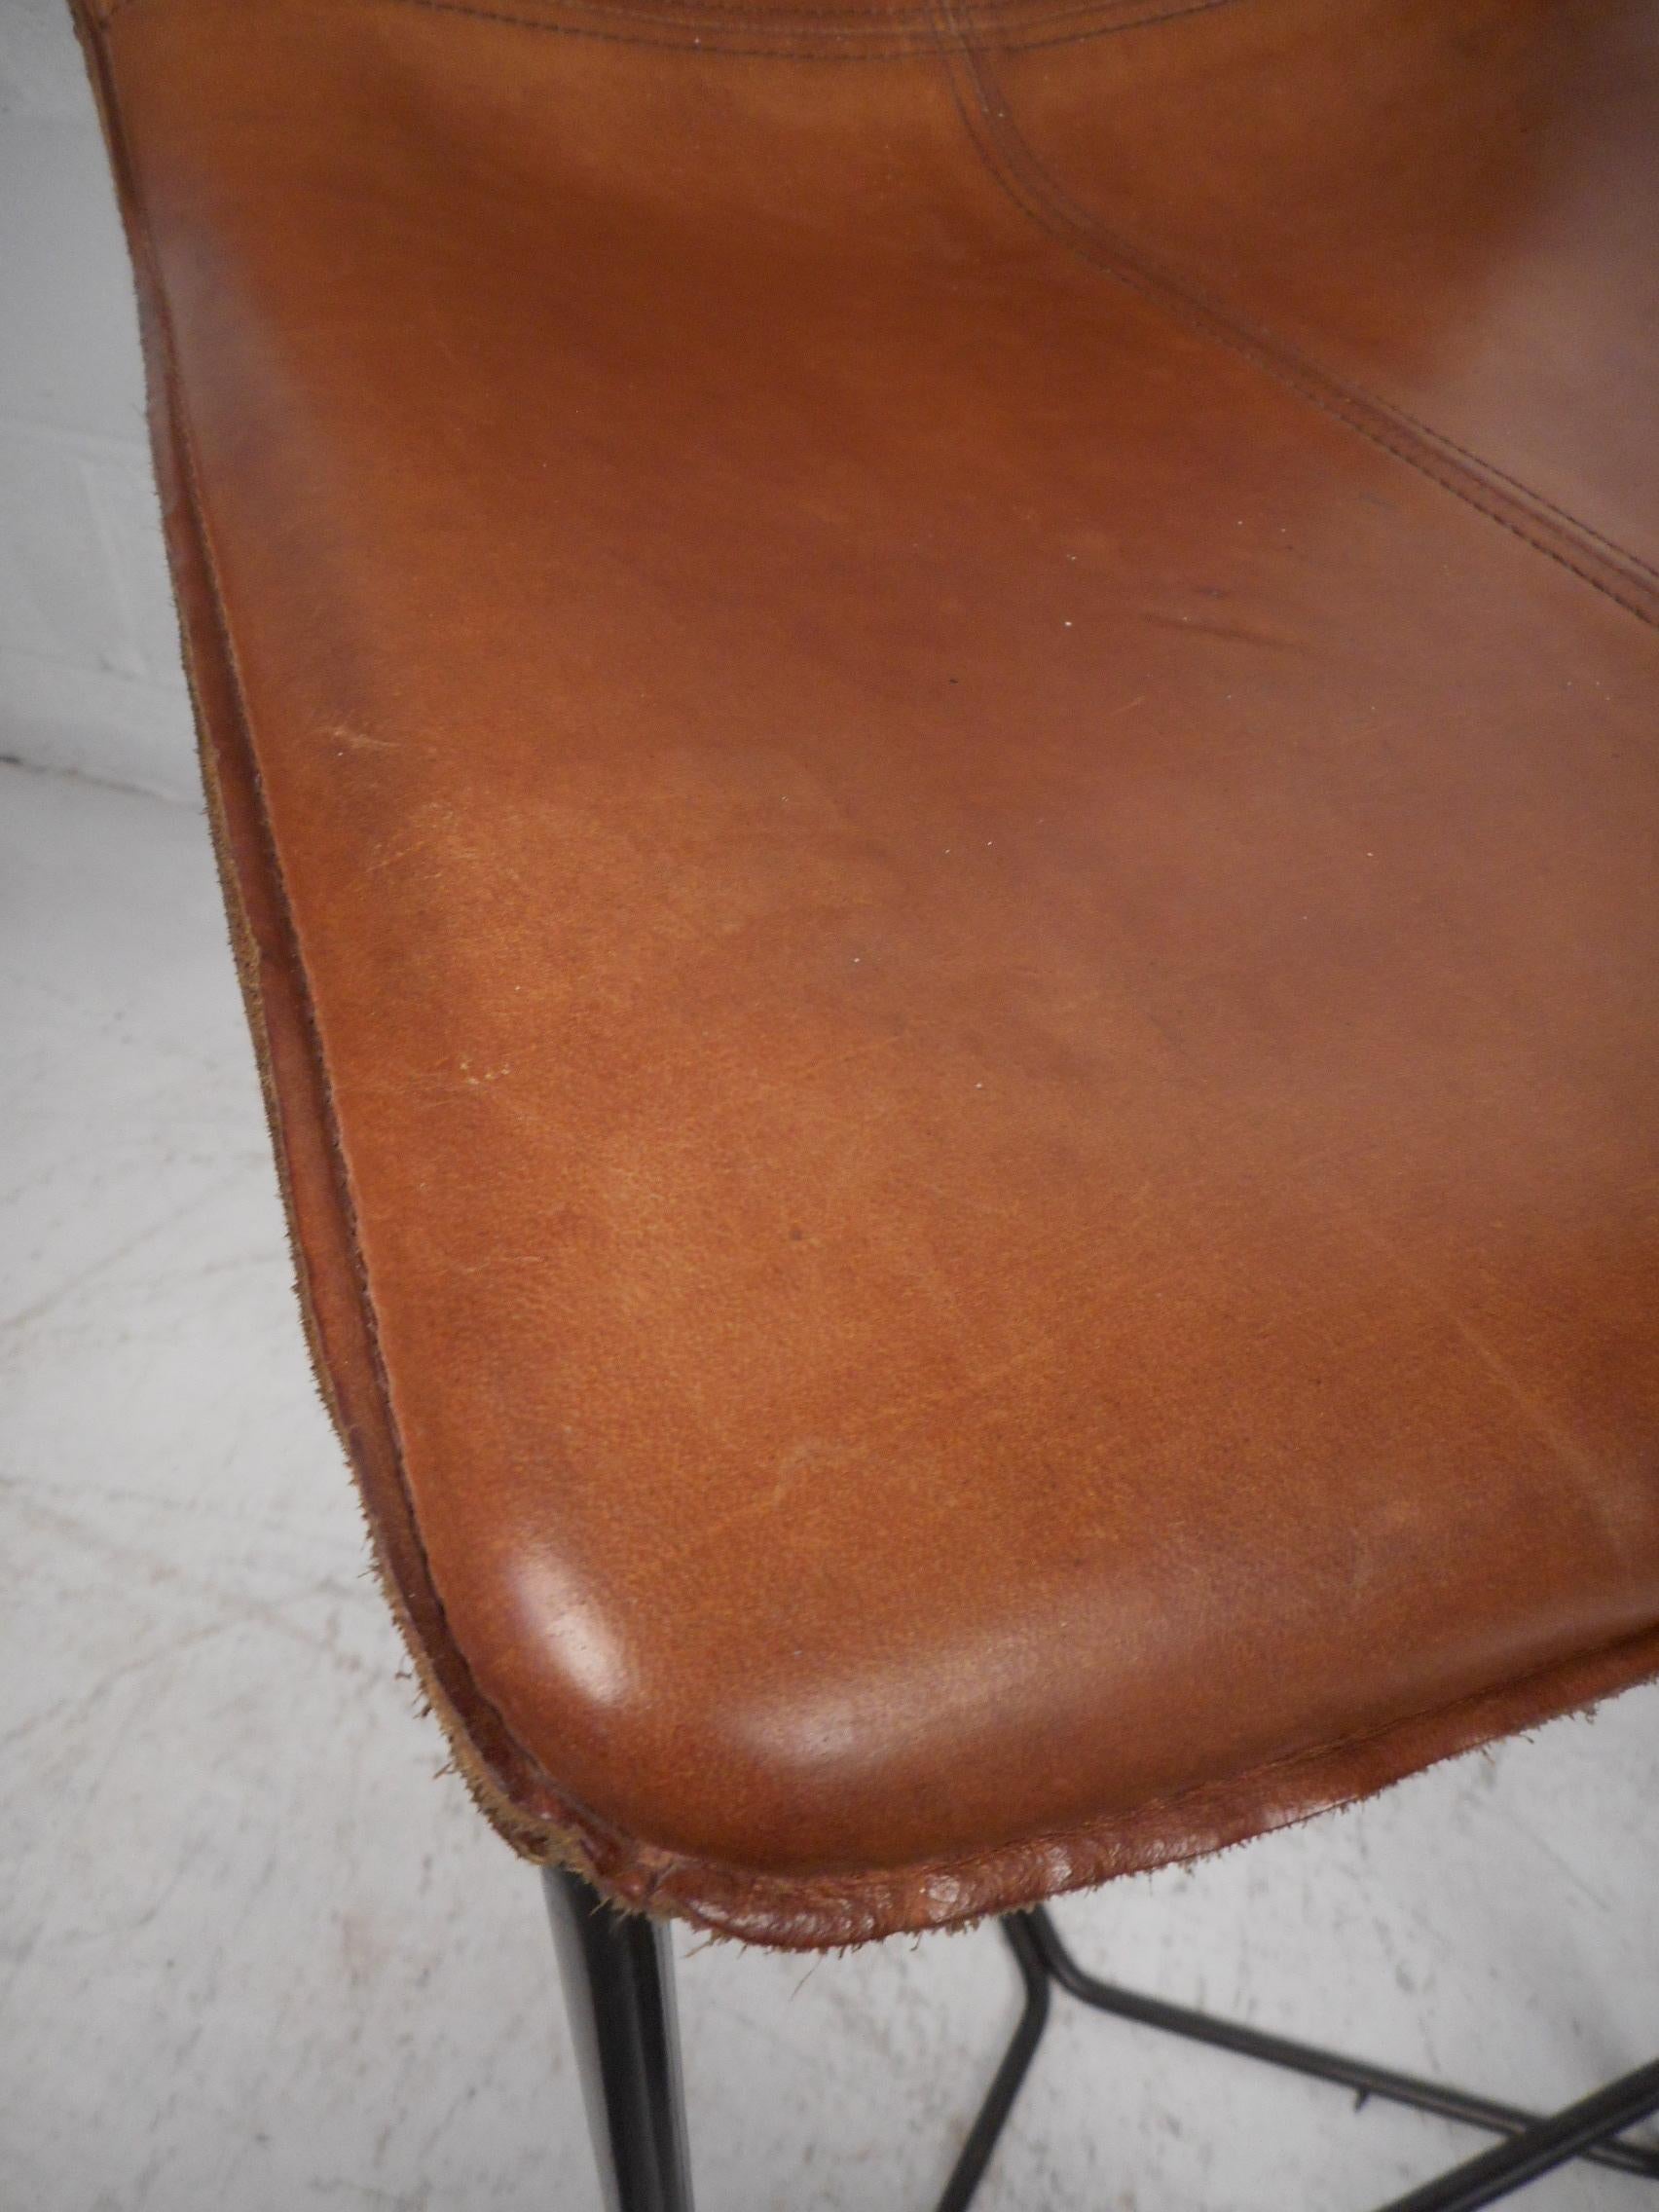 Pair of Mid-Century Modern Stools with Leather Upholstery 3